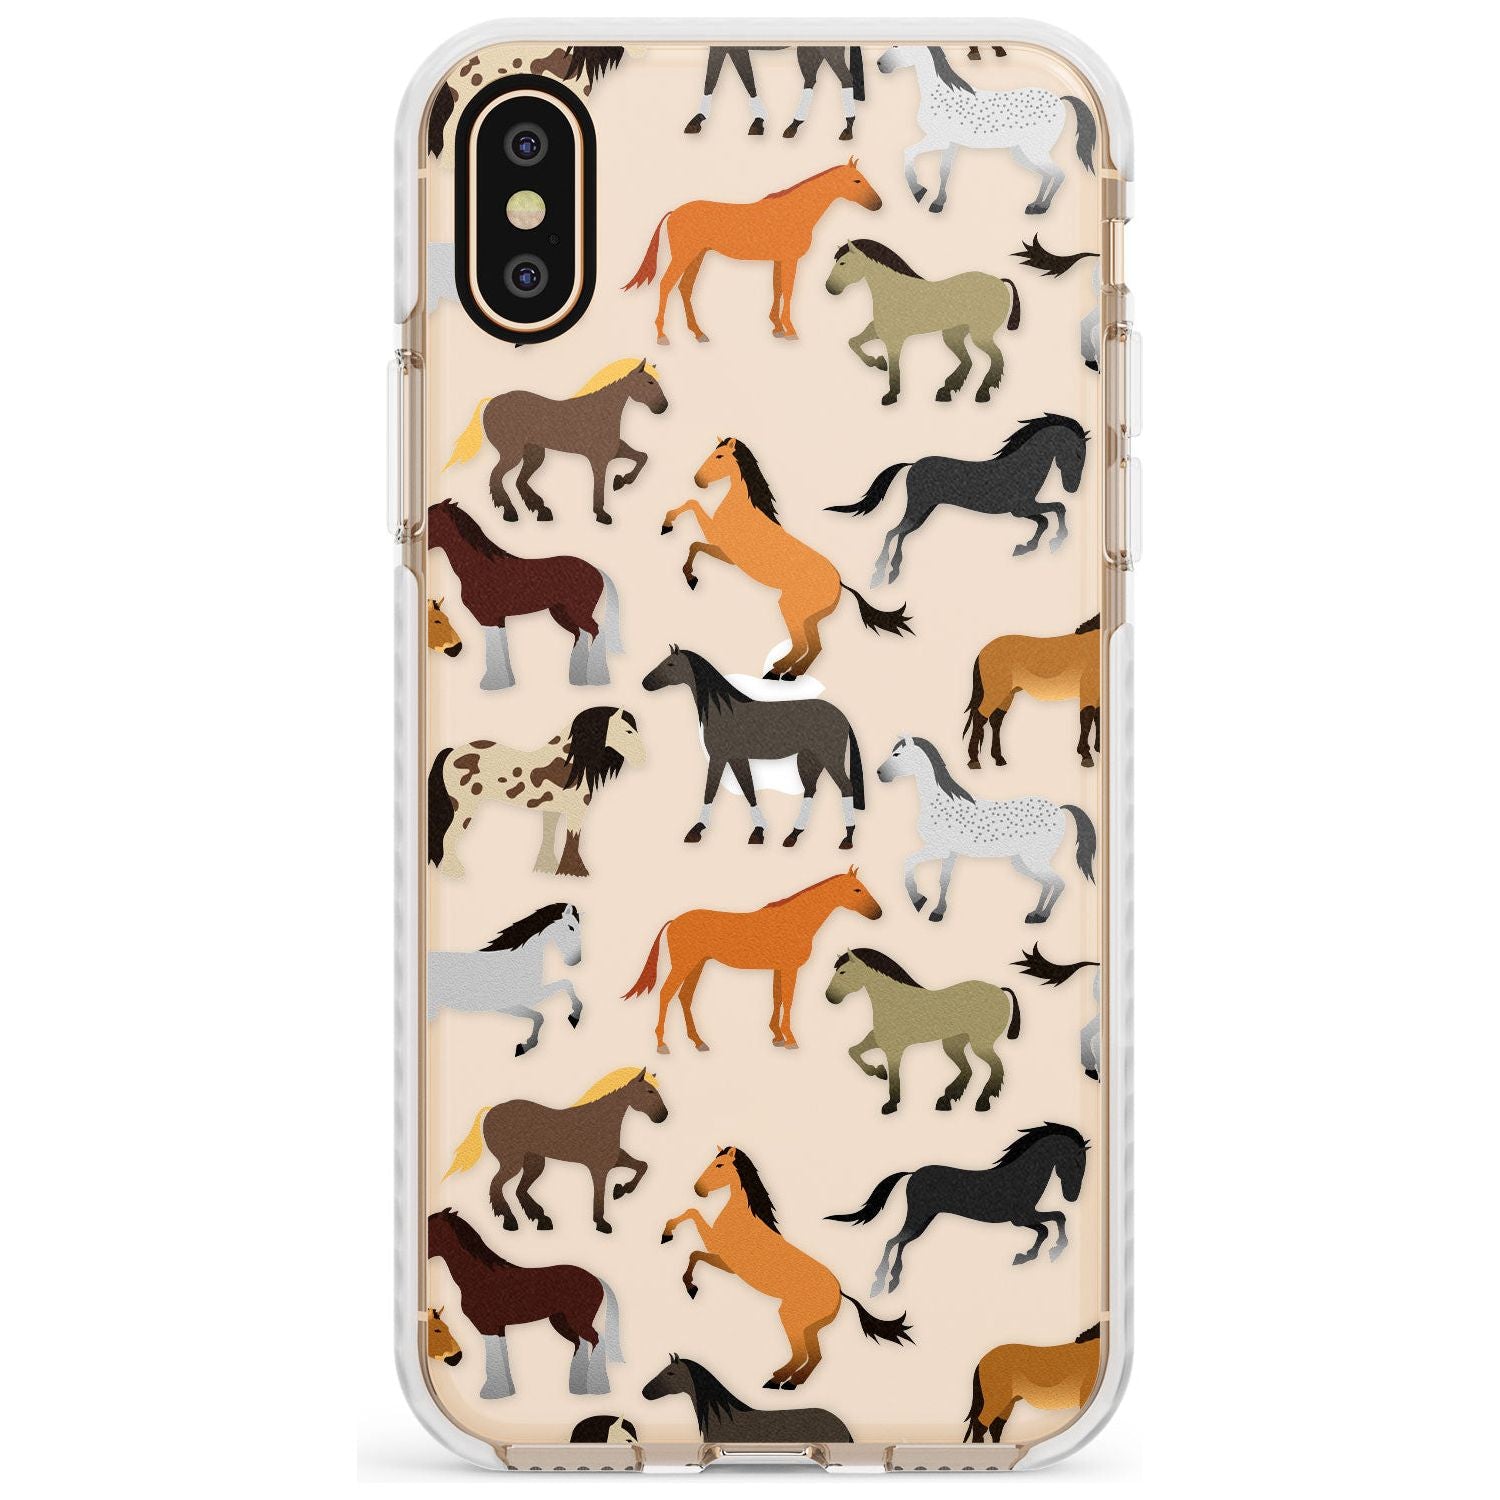 Horse Pattern Impact Phone Case for iPhone X XS Max XR